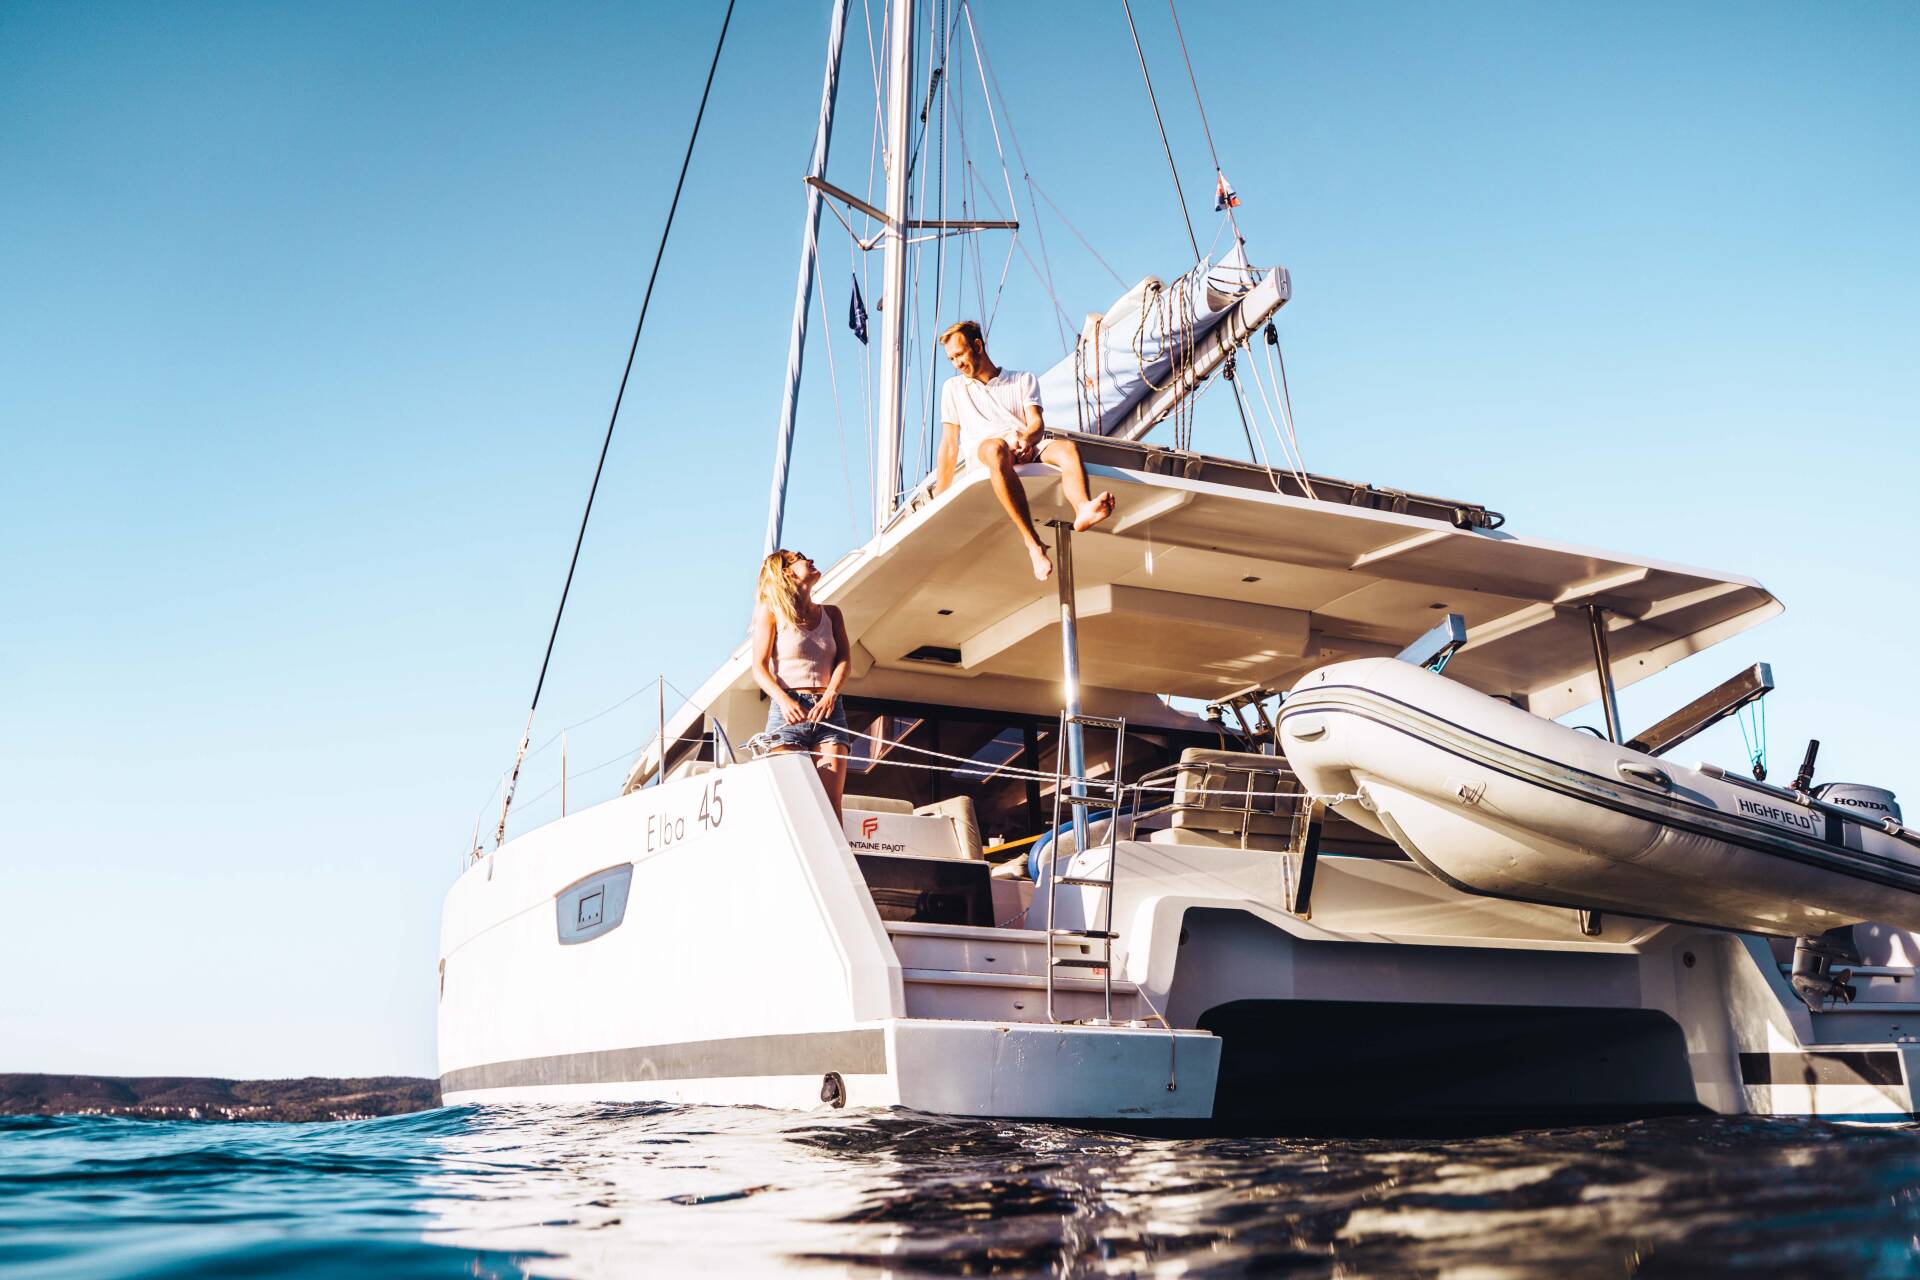 Charter a yacht with Navigare Yachting in the Caribbean